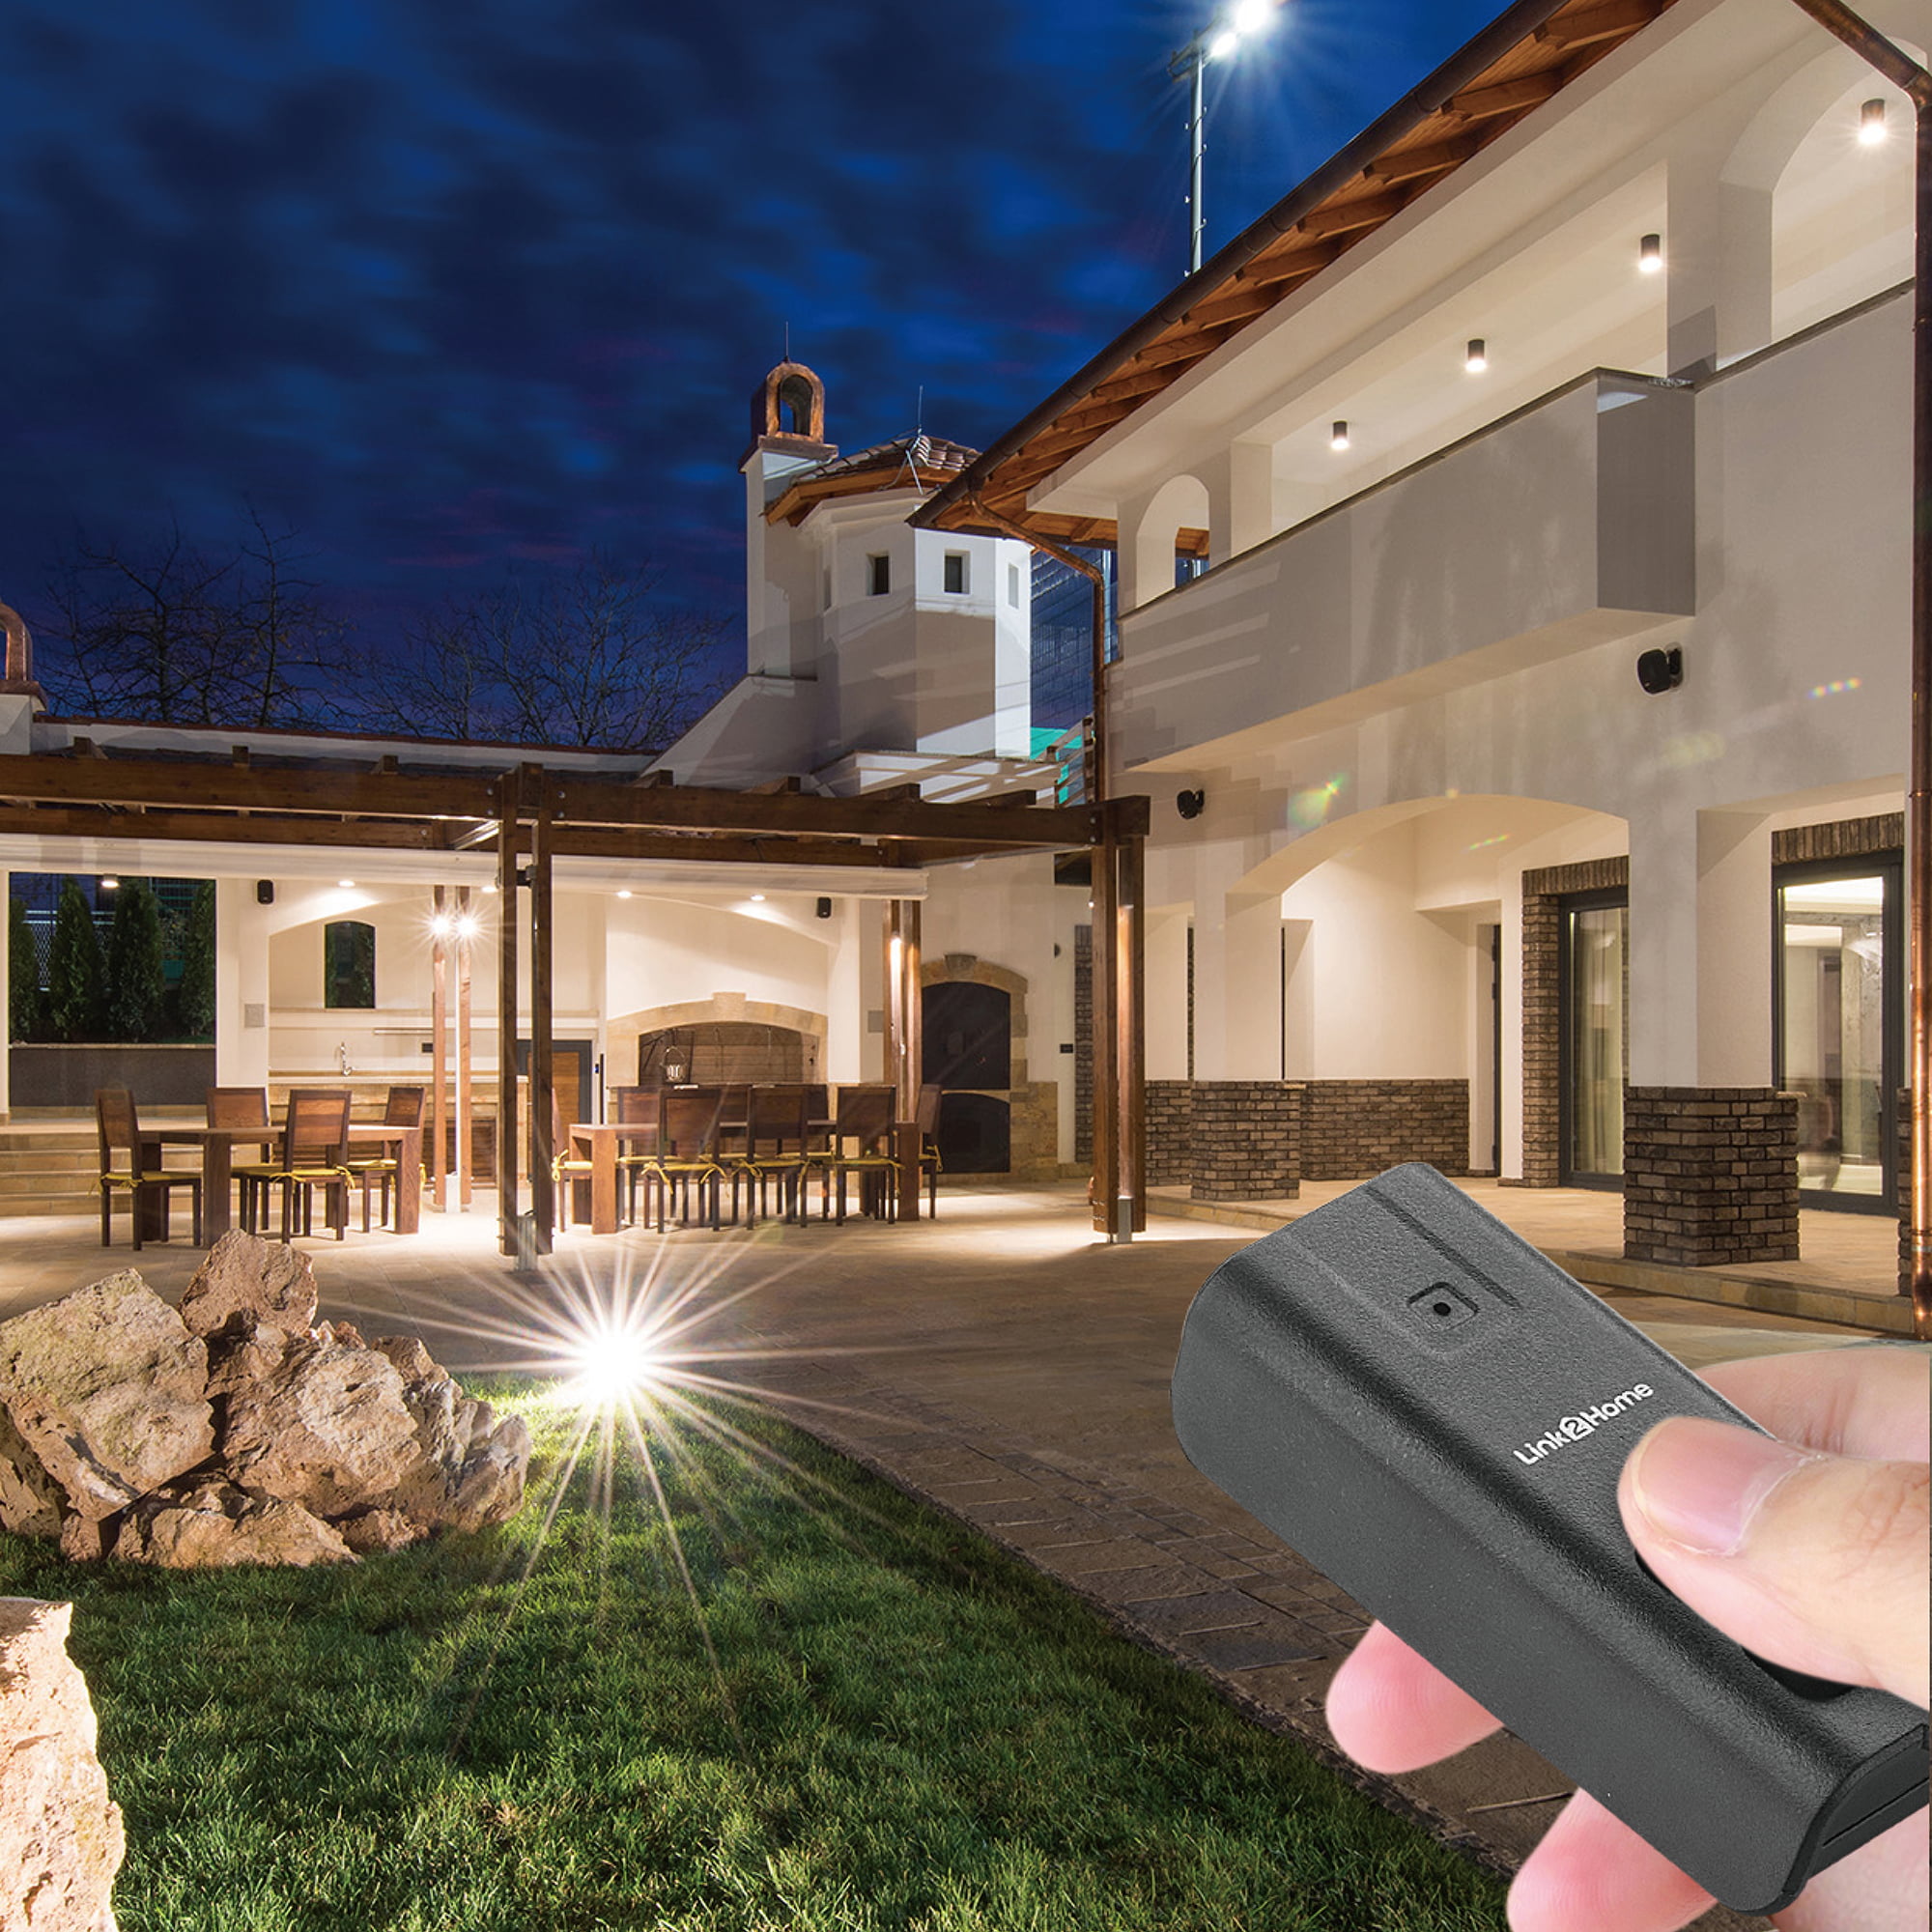 Link2Home Outdoor Weatherproof Wireless Remote Control Double